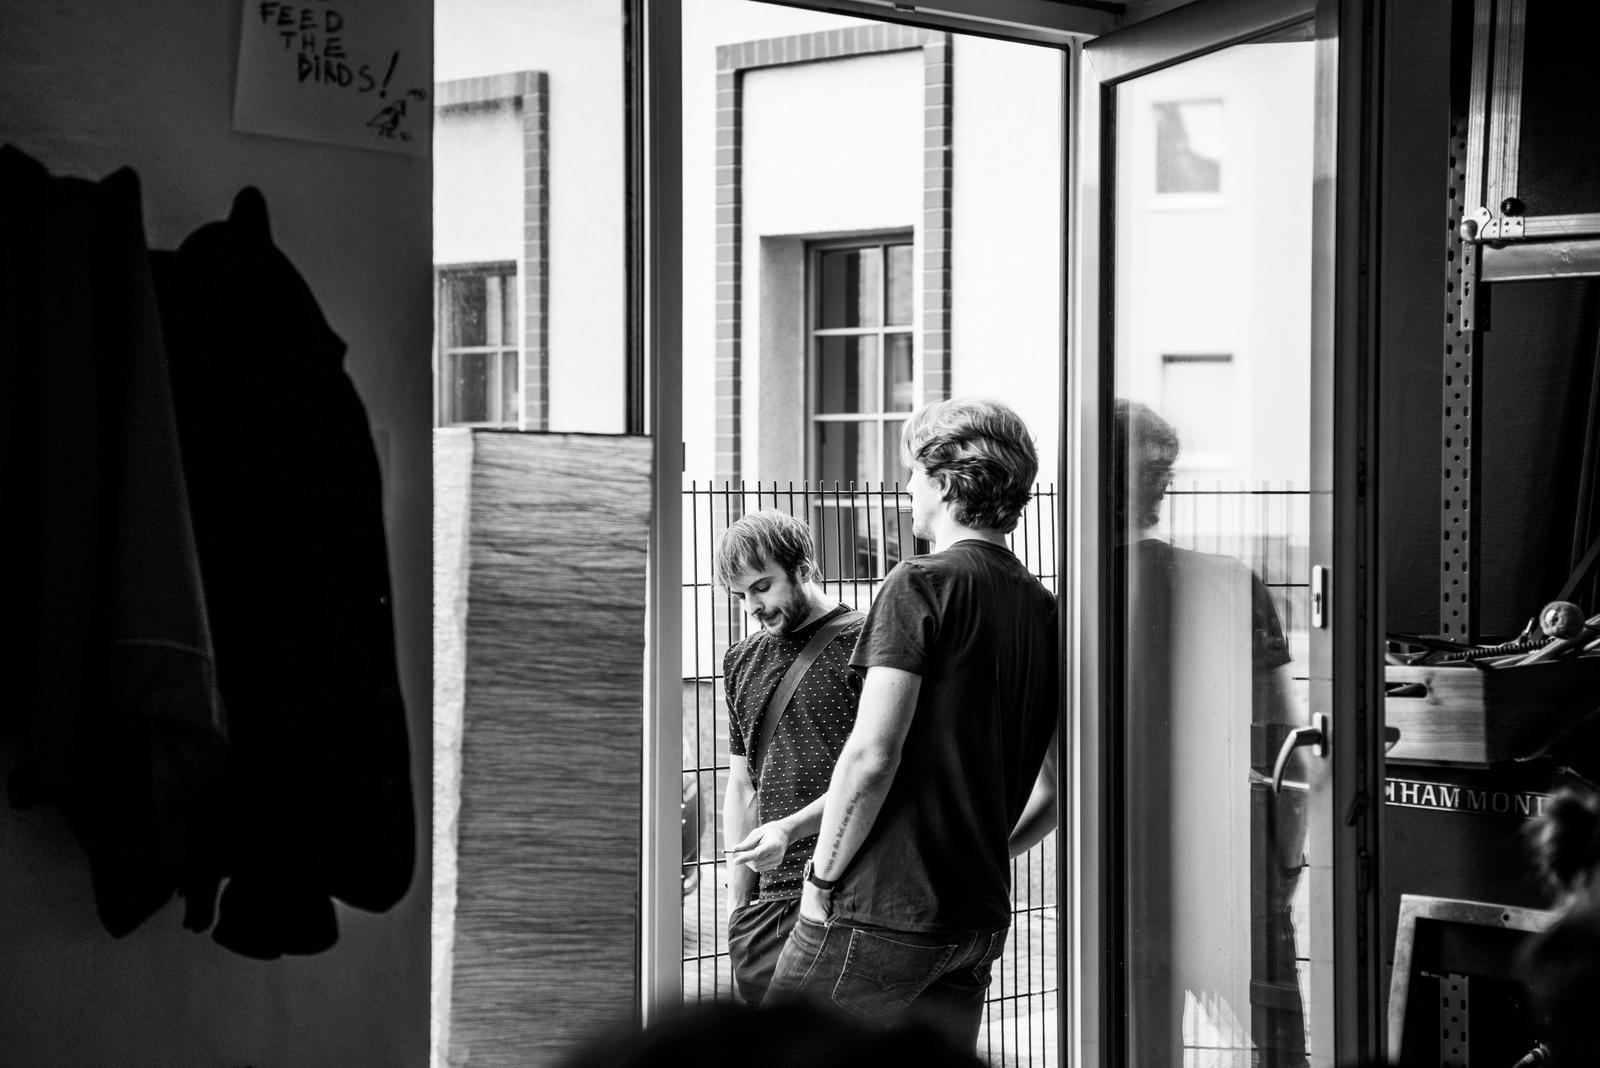 2017 — Nils Frahm and Robert Raths - Erased Tapes Recording Residency at Vox-Ton Studio in Berlin - photo by Claudia Goedke